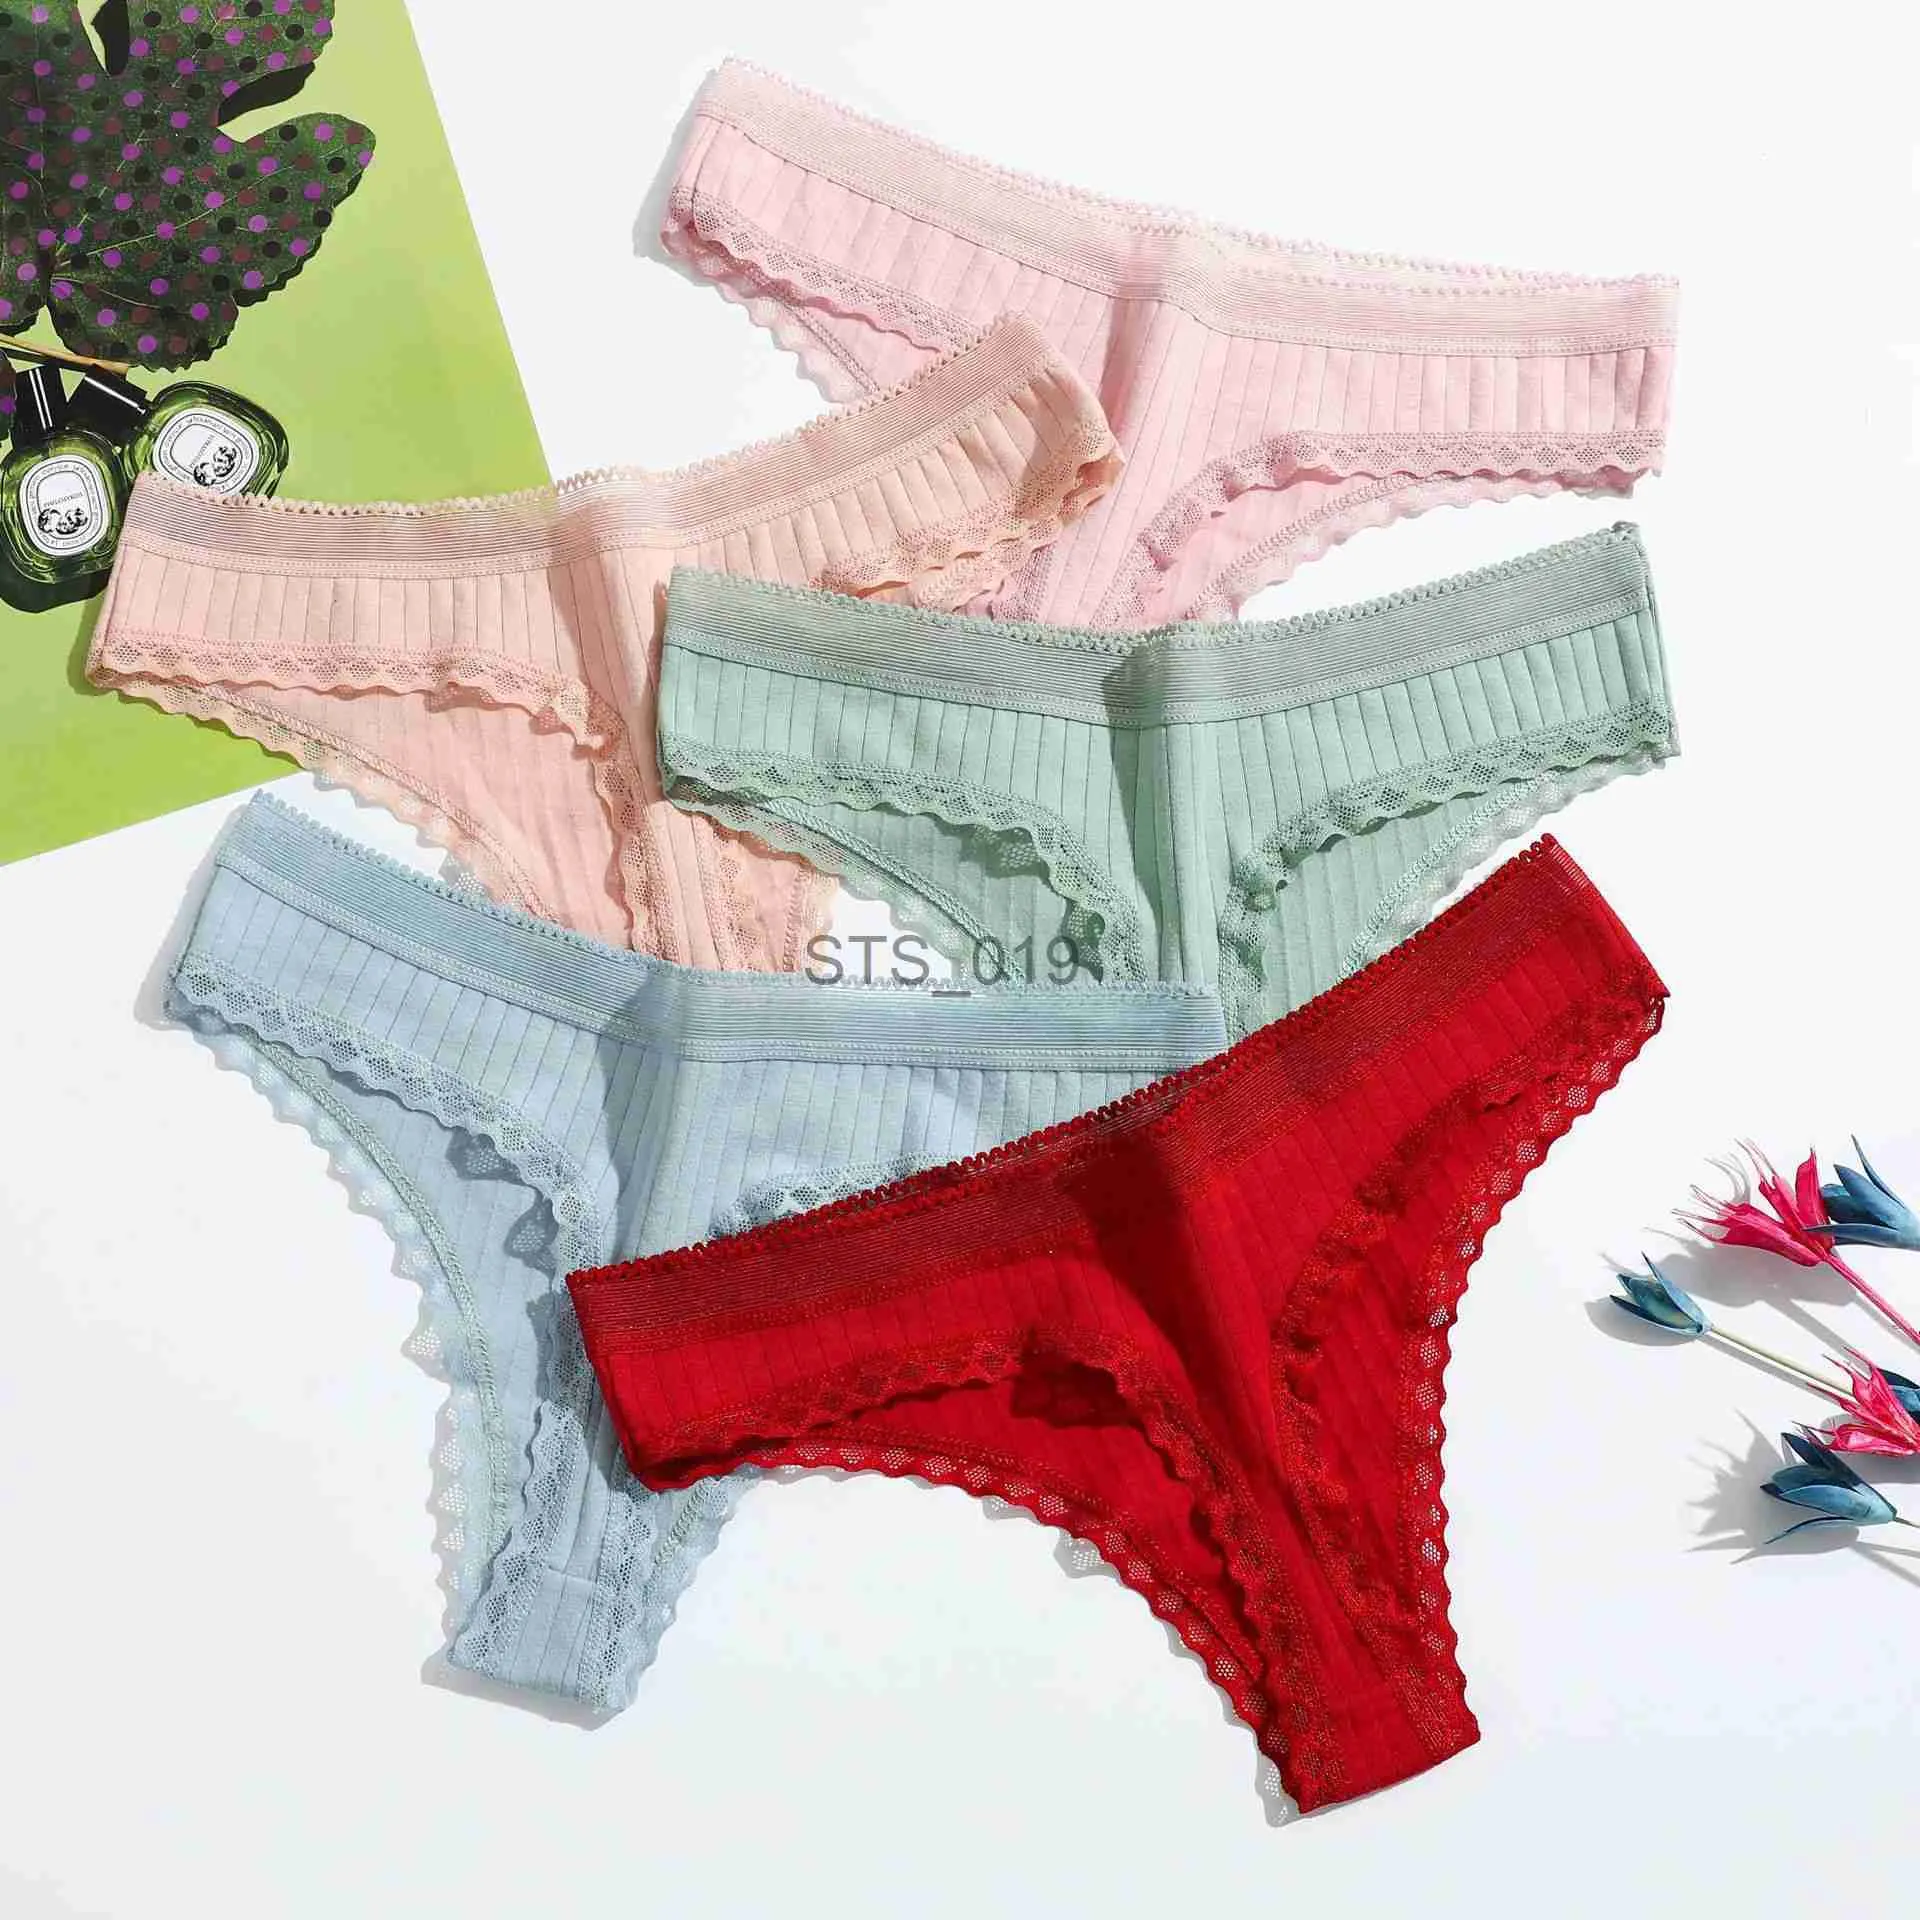 Briefs Panties Other Panties Sexy Cotton Thong Women Lace Low Waist Panties Underwear Ladies Briefs Lingere Panty Solid Color Breathable Female G-strings New x0719